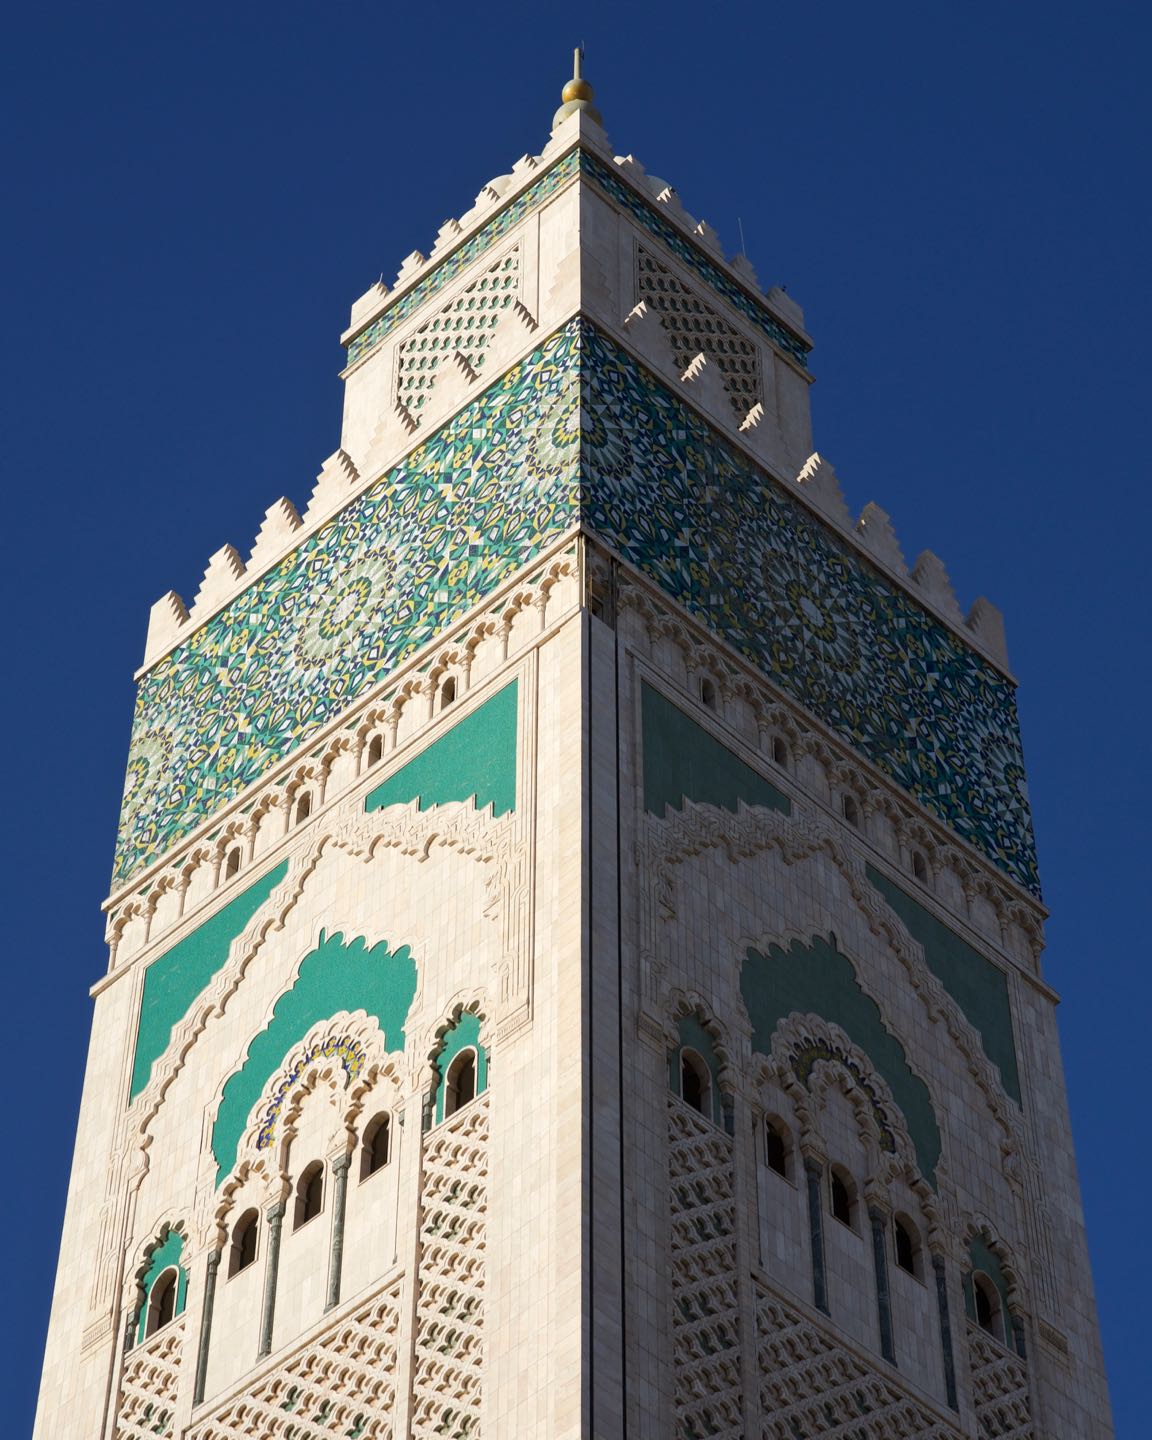 Fine details on the tower of the Hassan II Mosque of Casablanca.